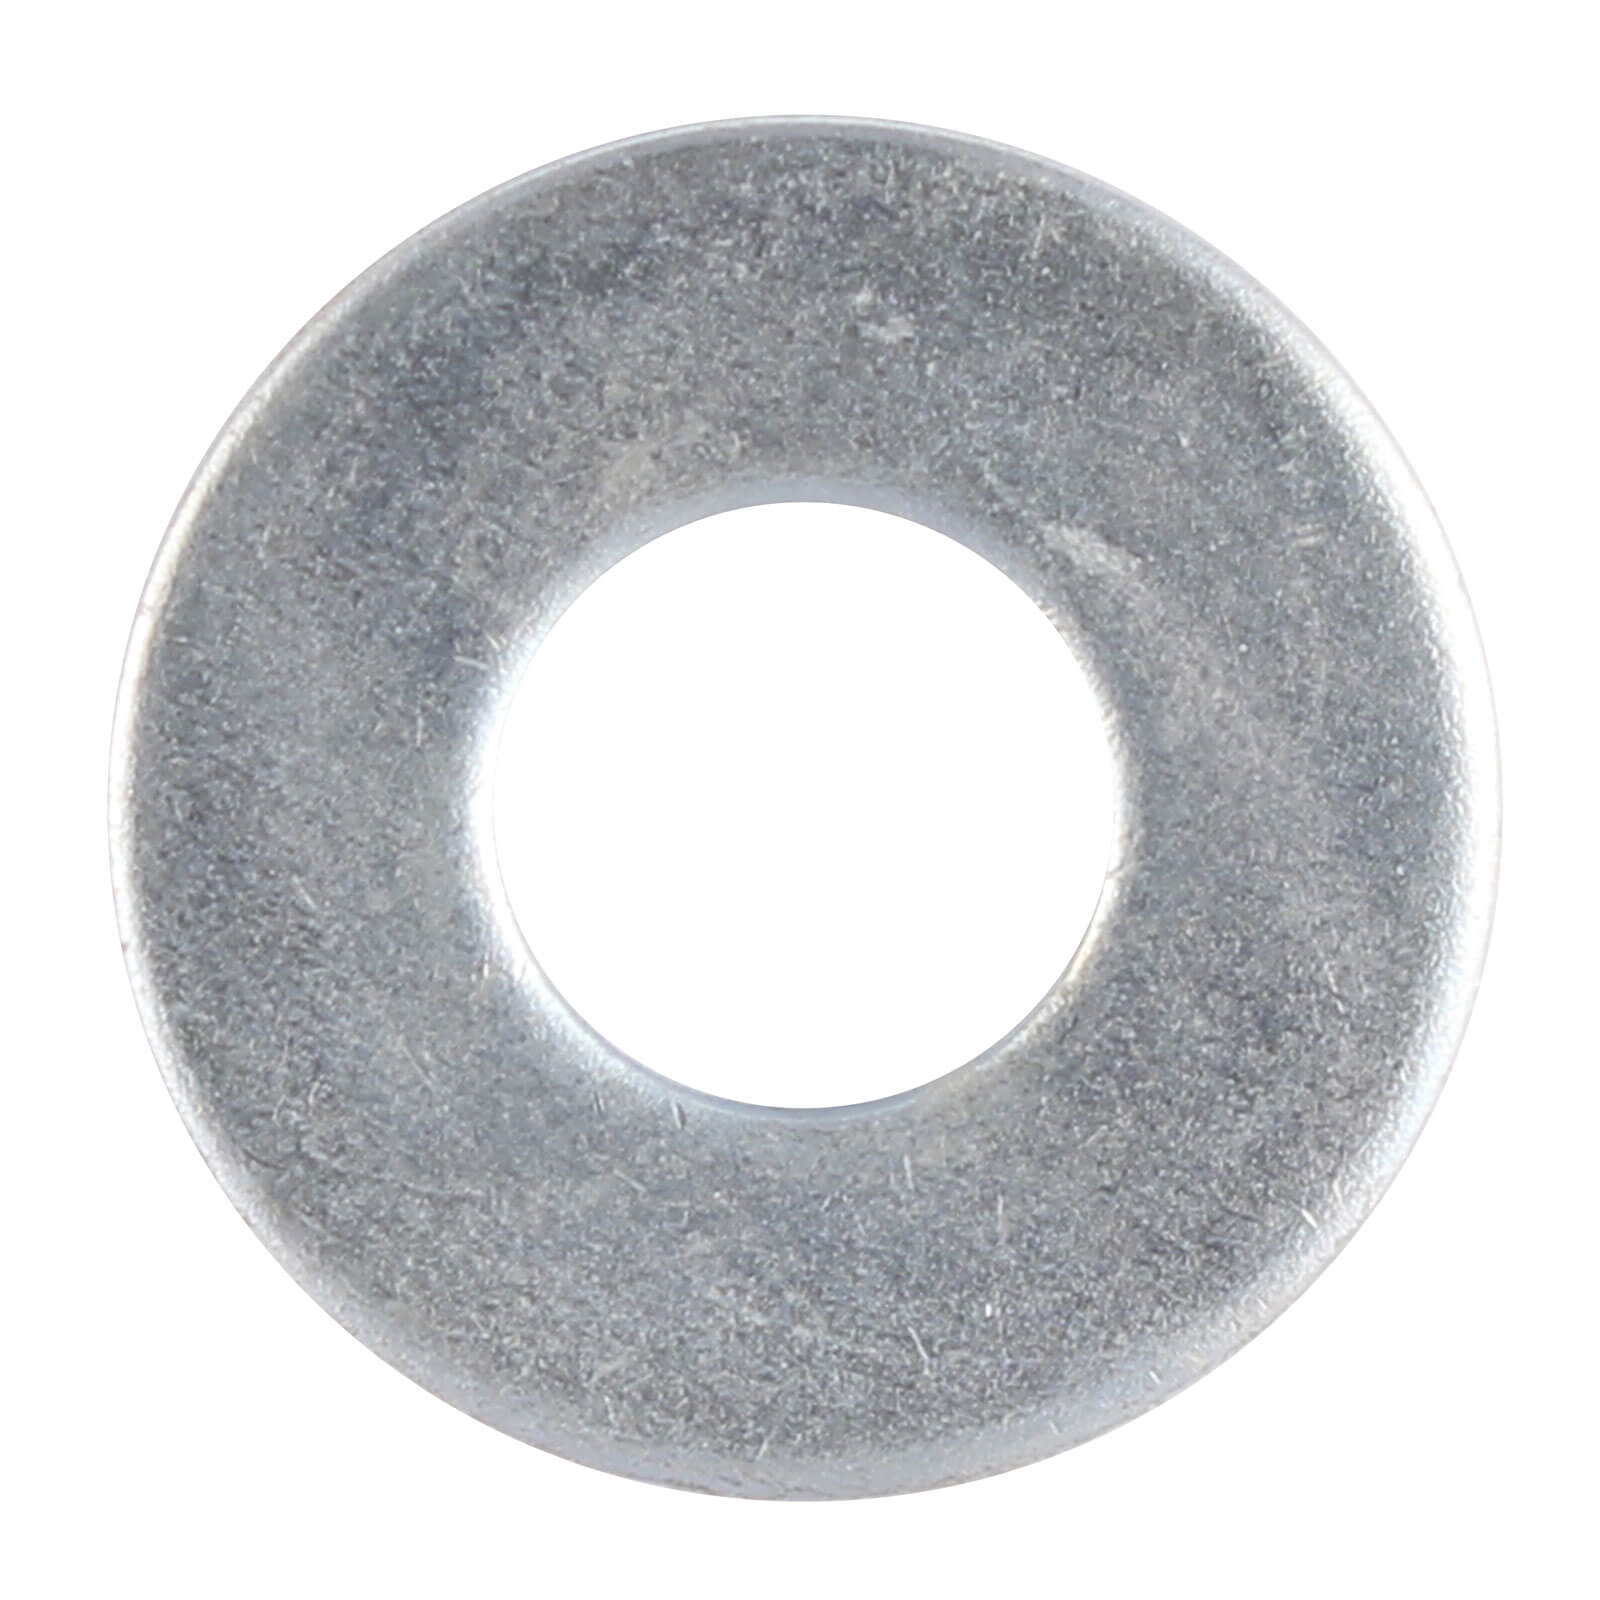 Photo of Washer Stainless Steel 16mm Pack Of 6